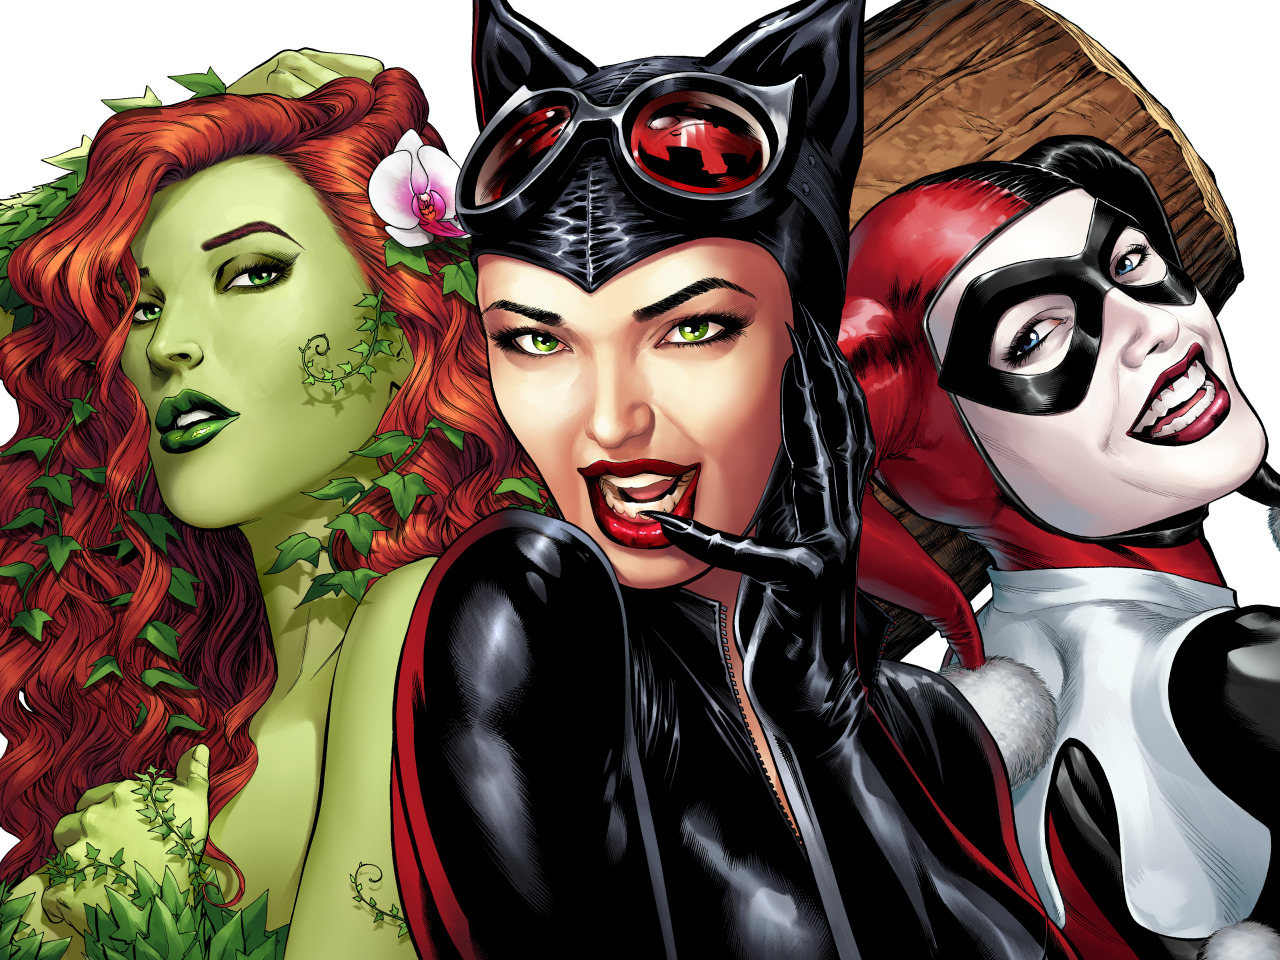 the game, art, poison ivy, DC Comics, Catwoman, Selina Kyle, cat woman, Har...